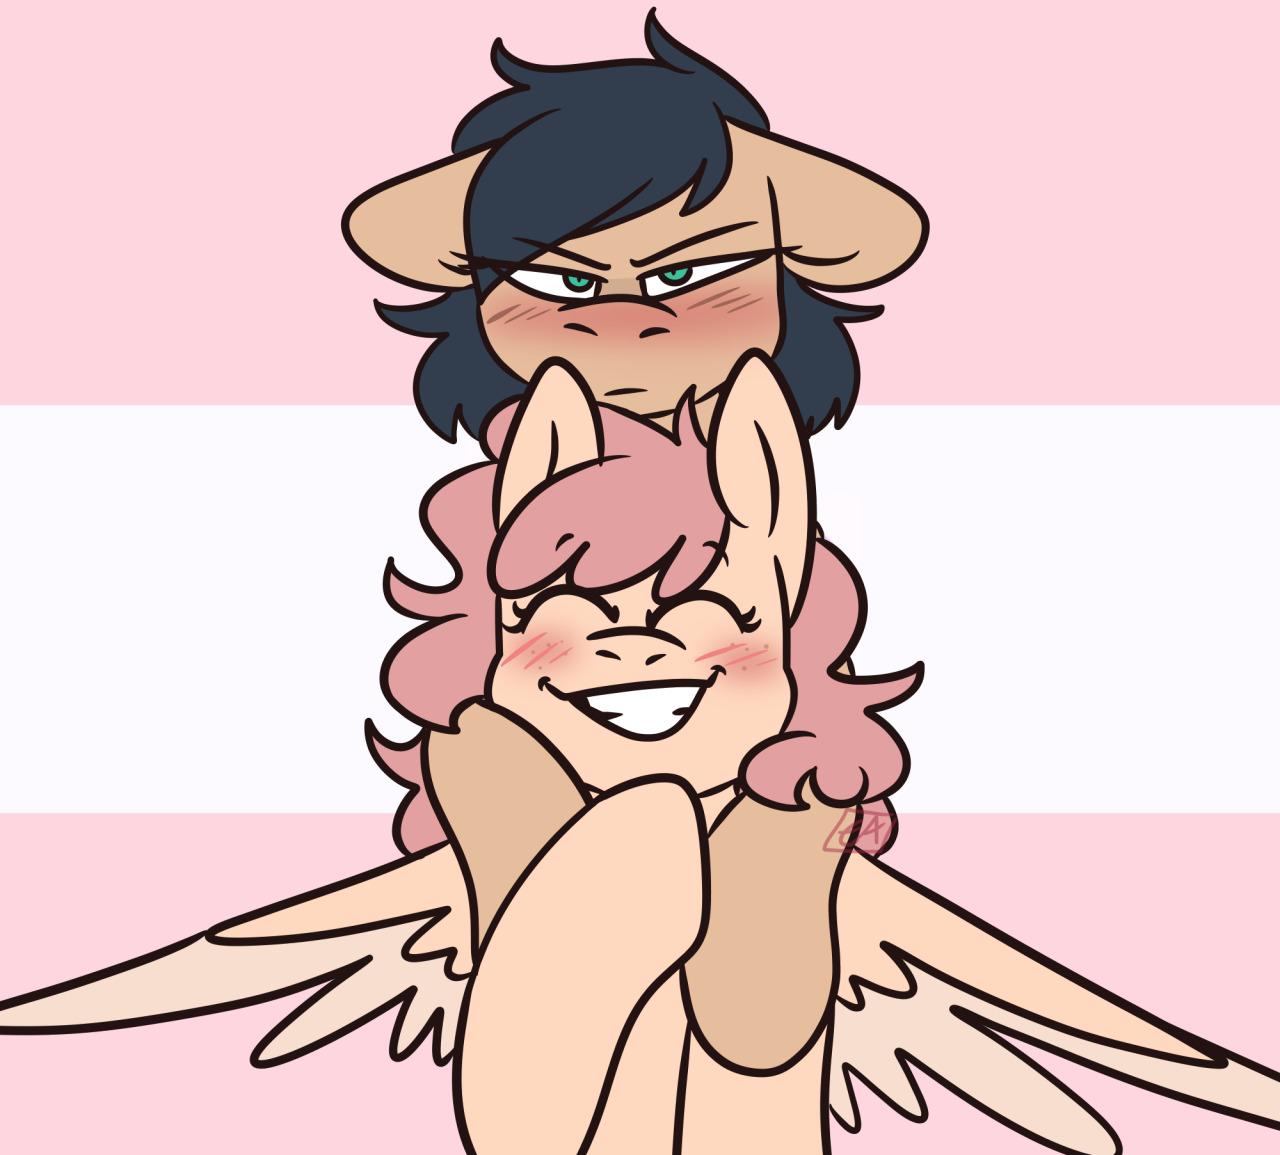 i refuse to wait until june to post them #mlp#mlp oc#Peach (OC)#blu#peachy blu#sapphic#oc#mlp pegasus #mlp earth pony  #i cannot wait to develop their little love sidestory on apb